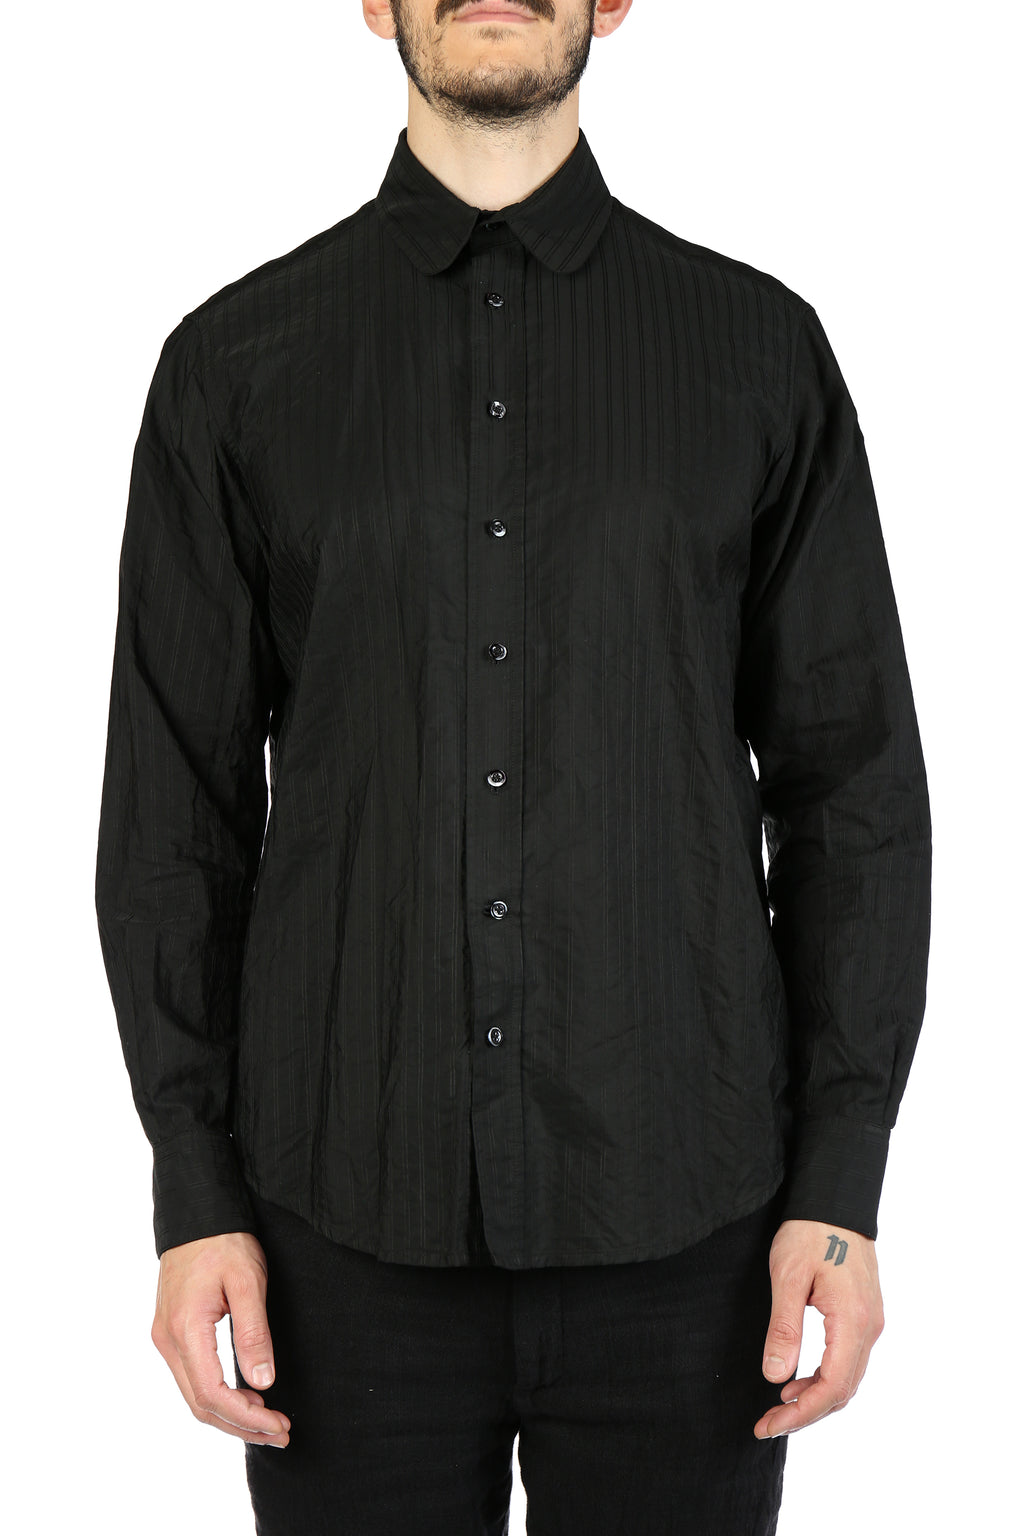 GEOFFREY B SMALL Men Handmade Classic Tailored Shirt With Rounded Point Collar W/Handmade Buttonholes And Buttons